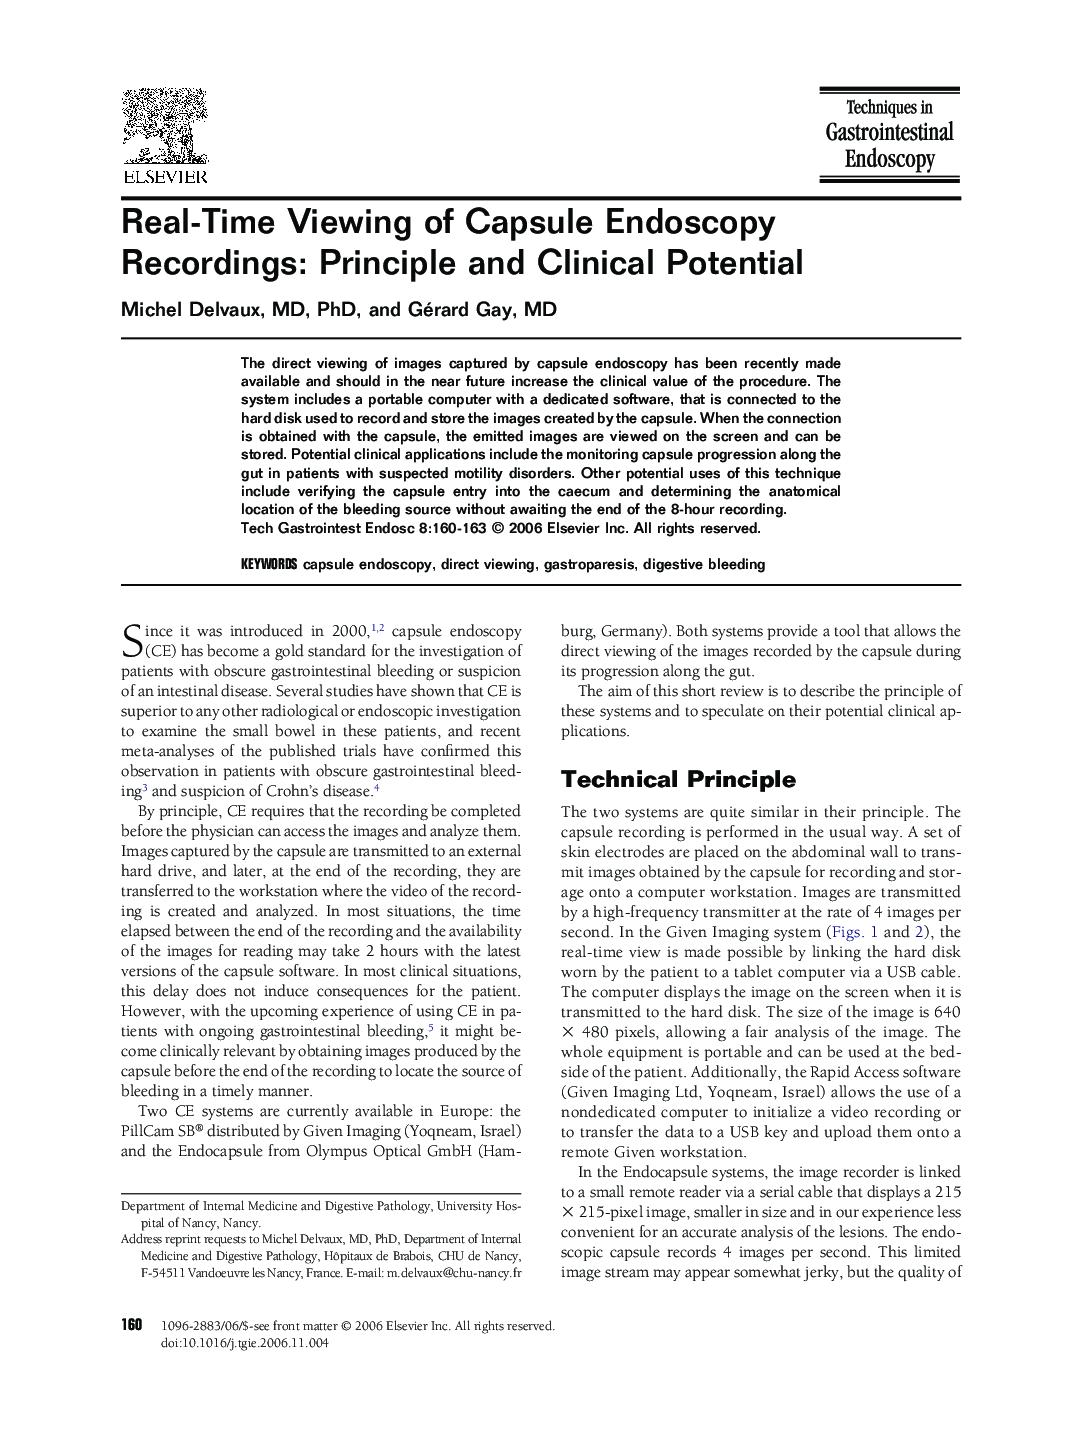 Real-Time Viewing of Capsule Endoscopy Recordings: Principle and Clinical Potential